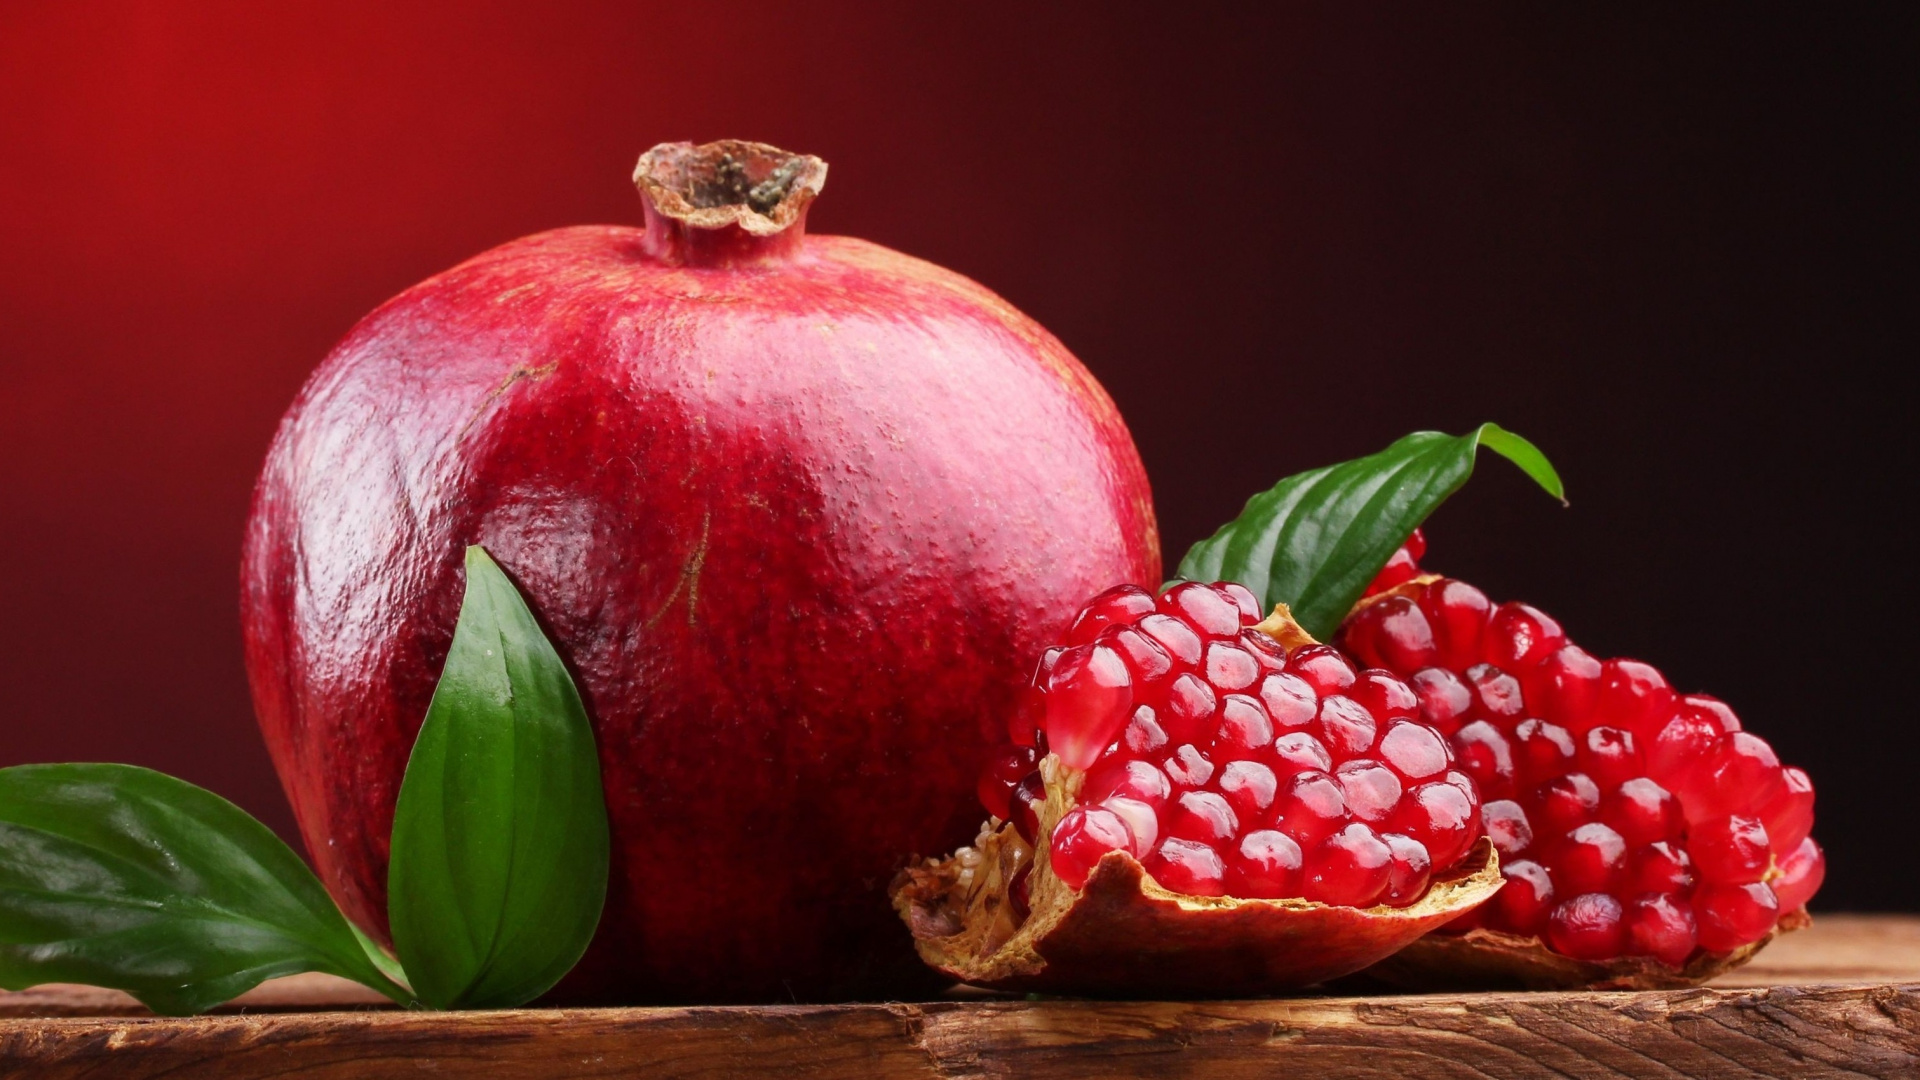 Red Fruit on Brown Wooden Table. Wallpaper in 1920x1080 Resolution